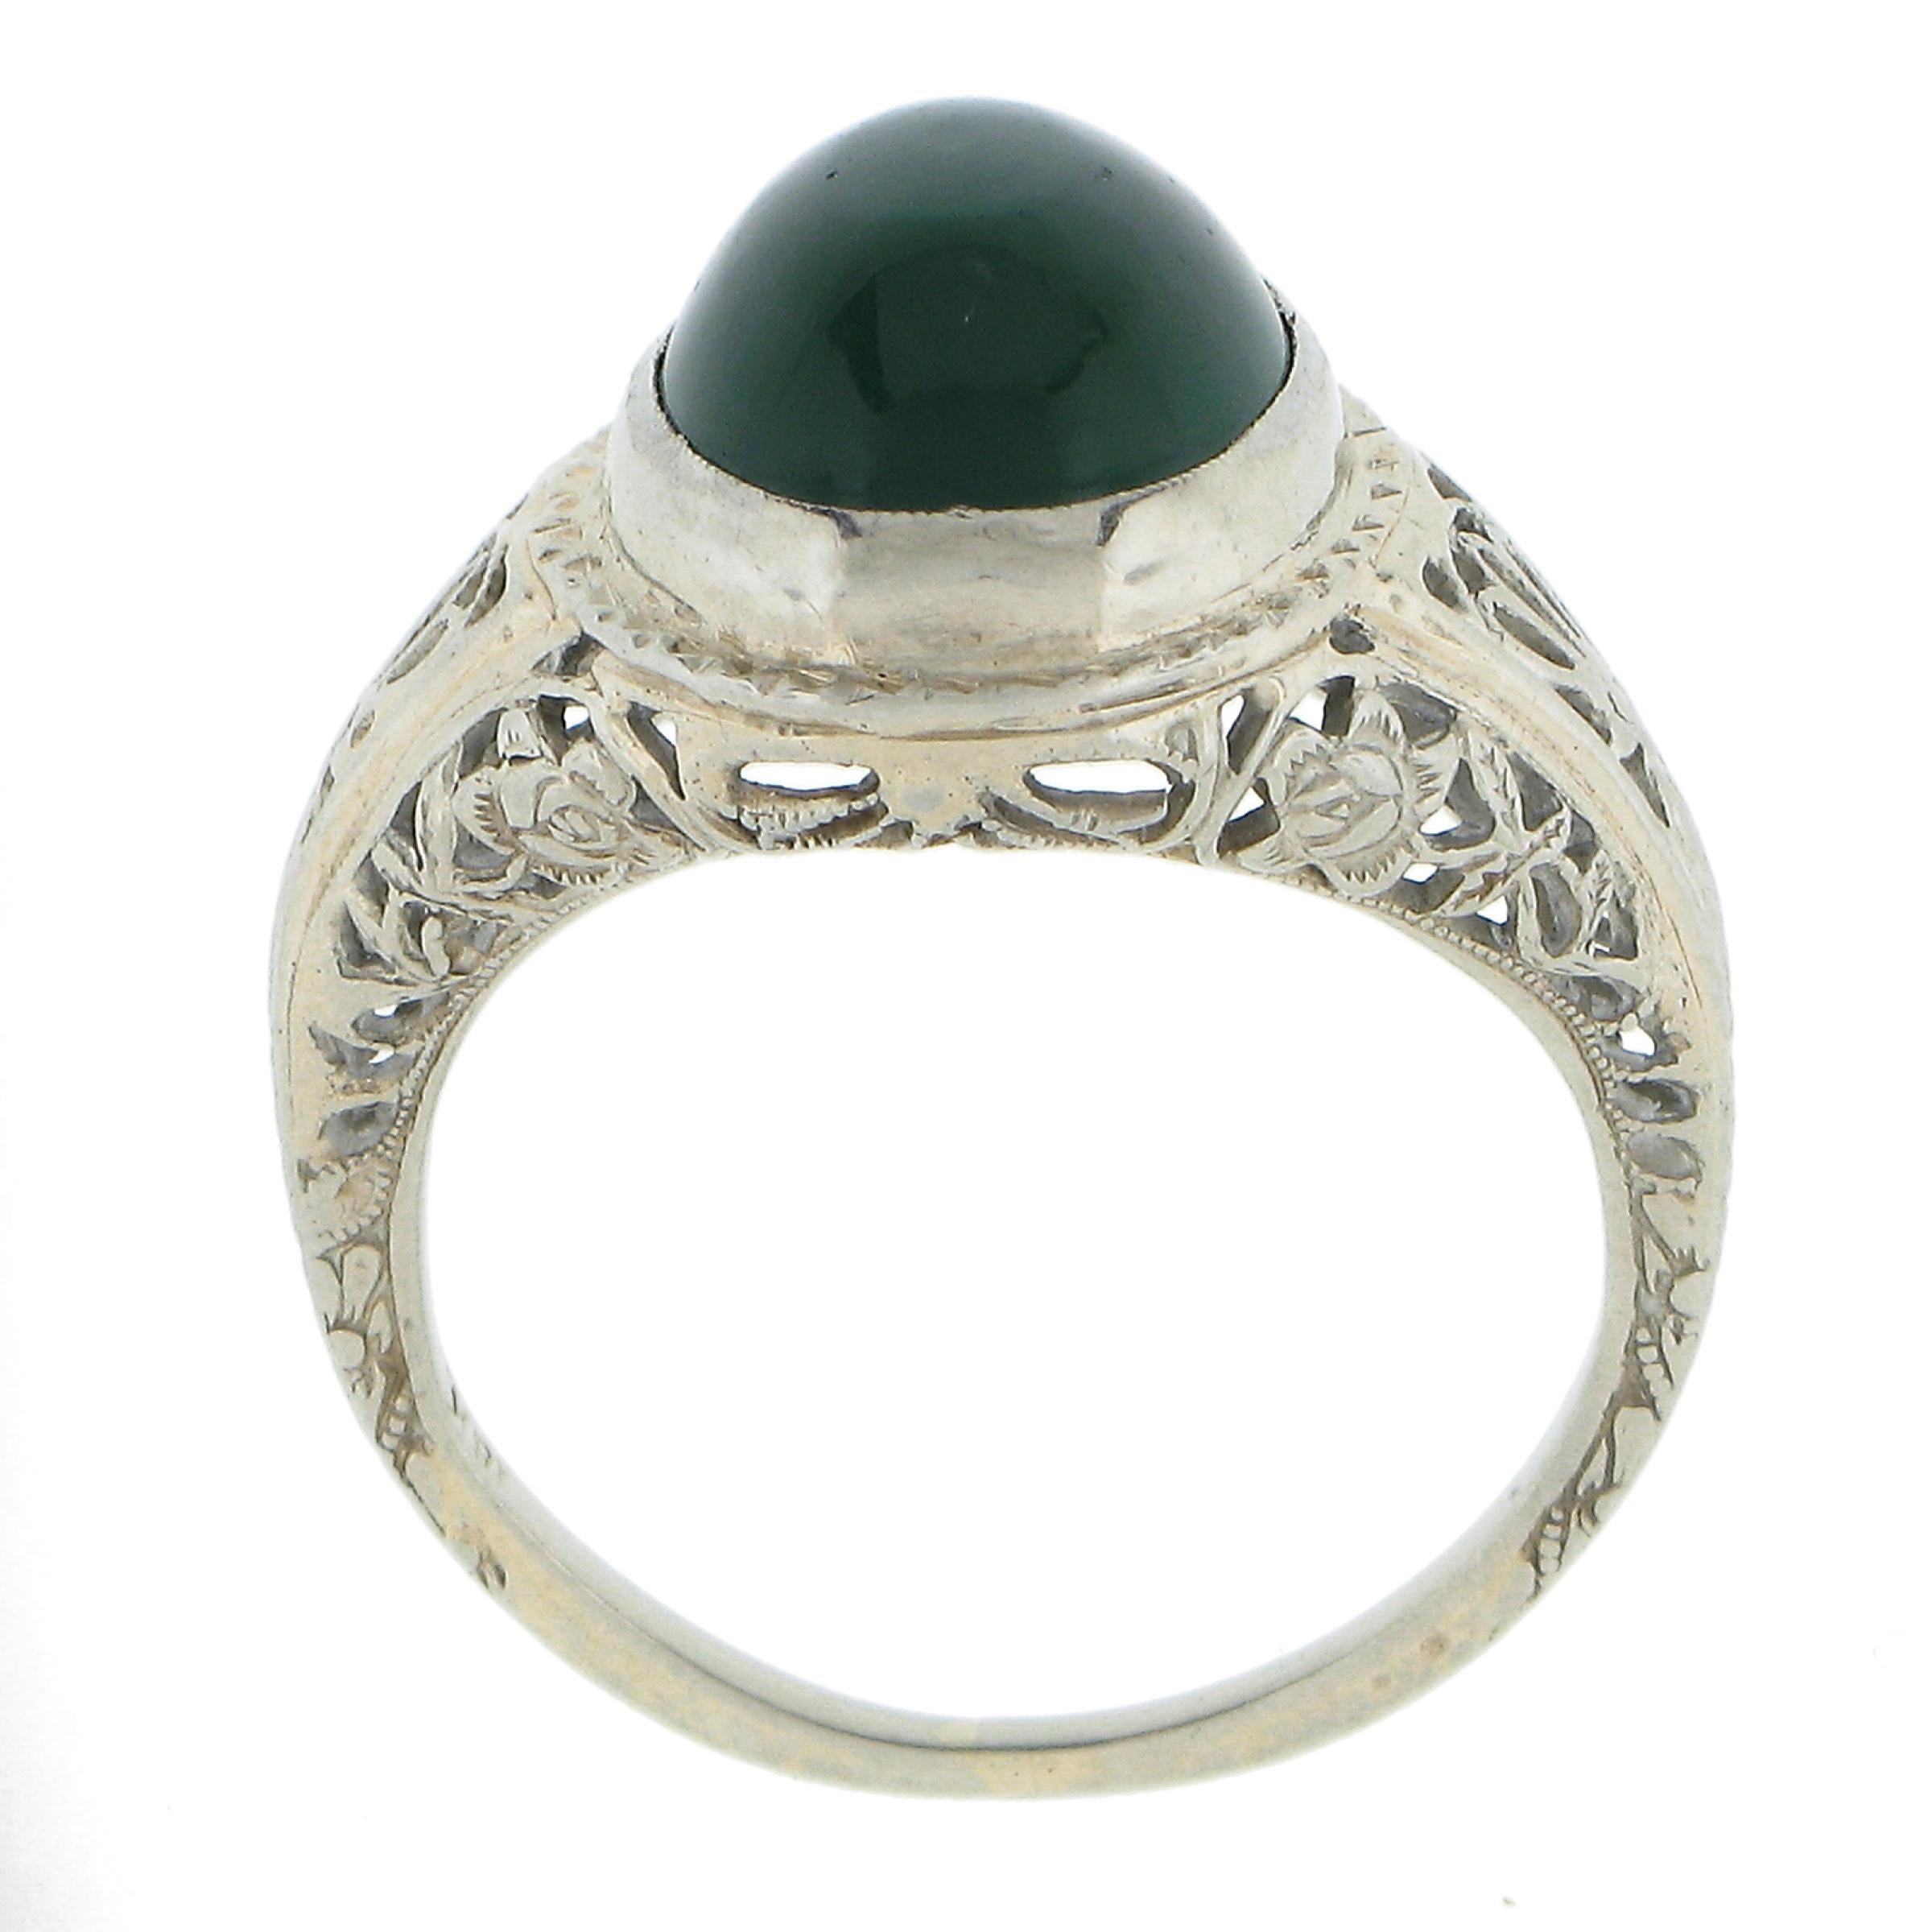 Antique 18K Gold Oval Cabochon Cut Onyx or Chrysoprase Solitaire Filigree Ring For Sale 3